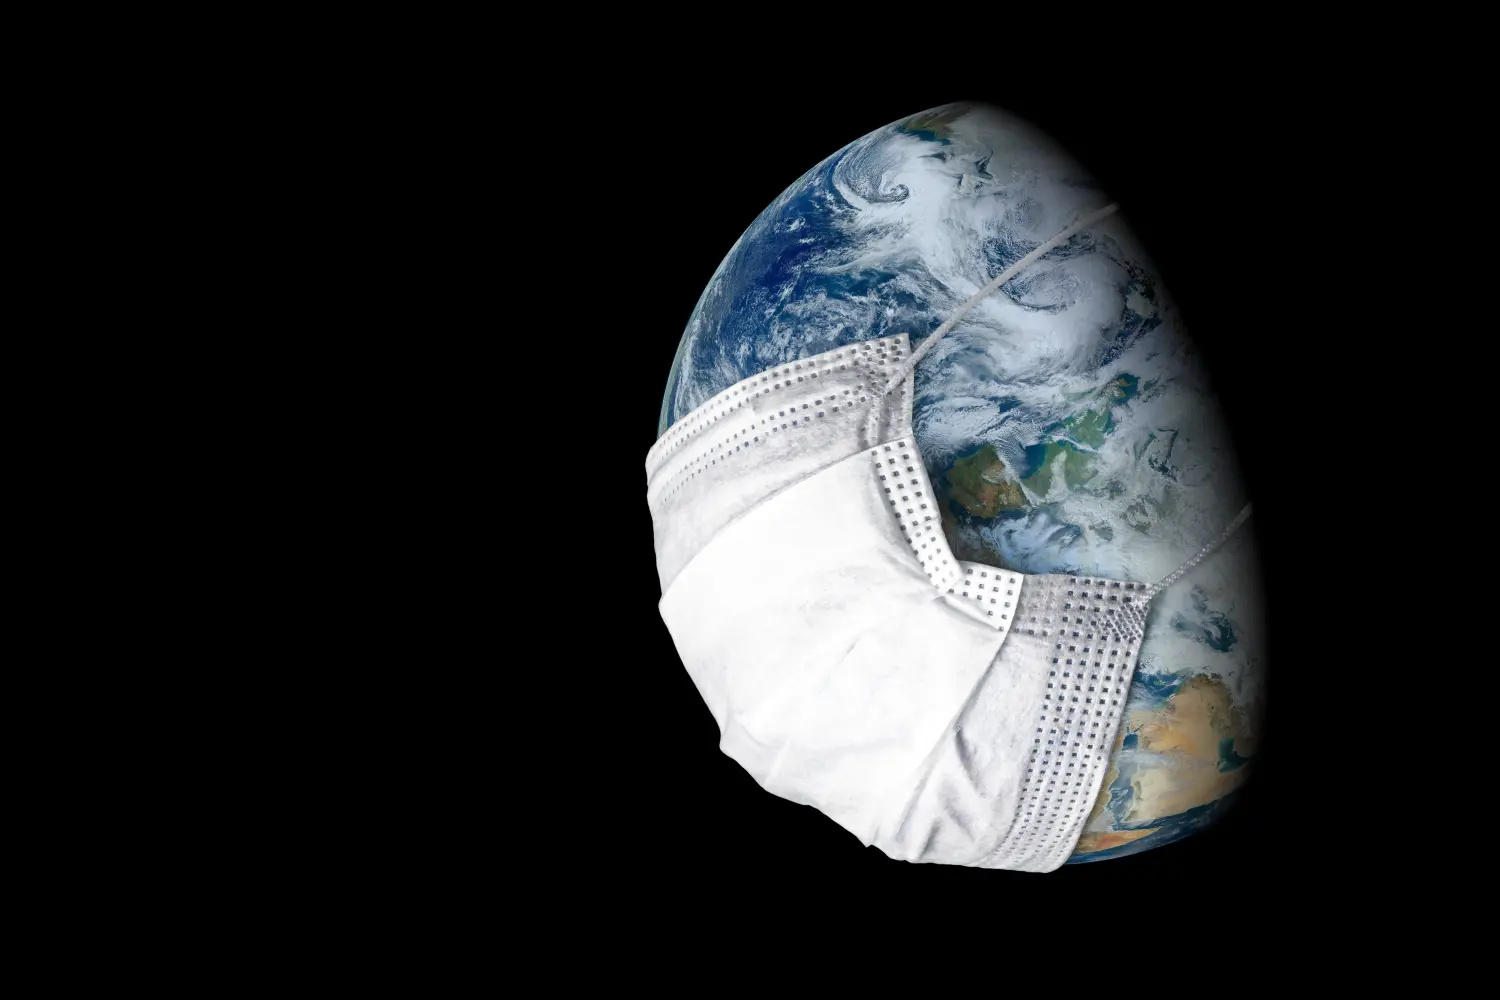 Picture of the planet Earth wearing a surgical mask.